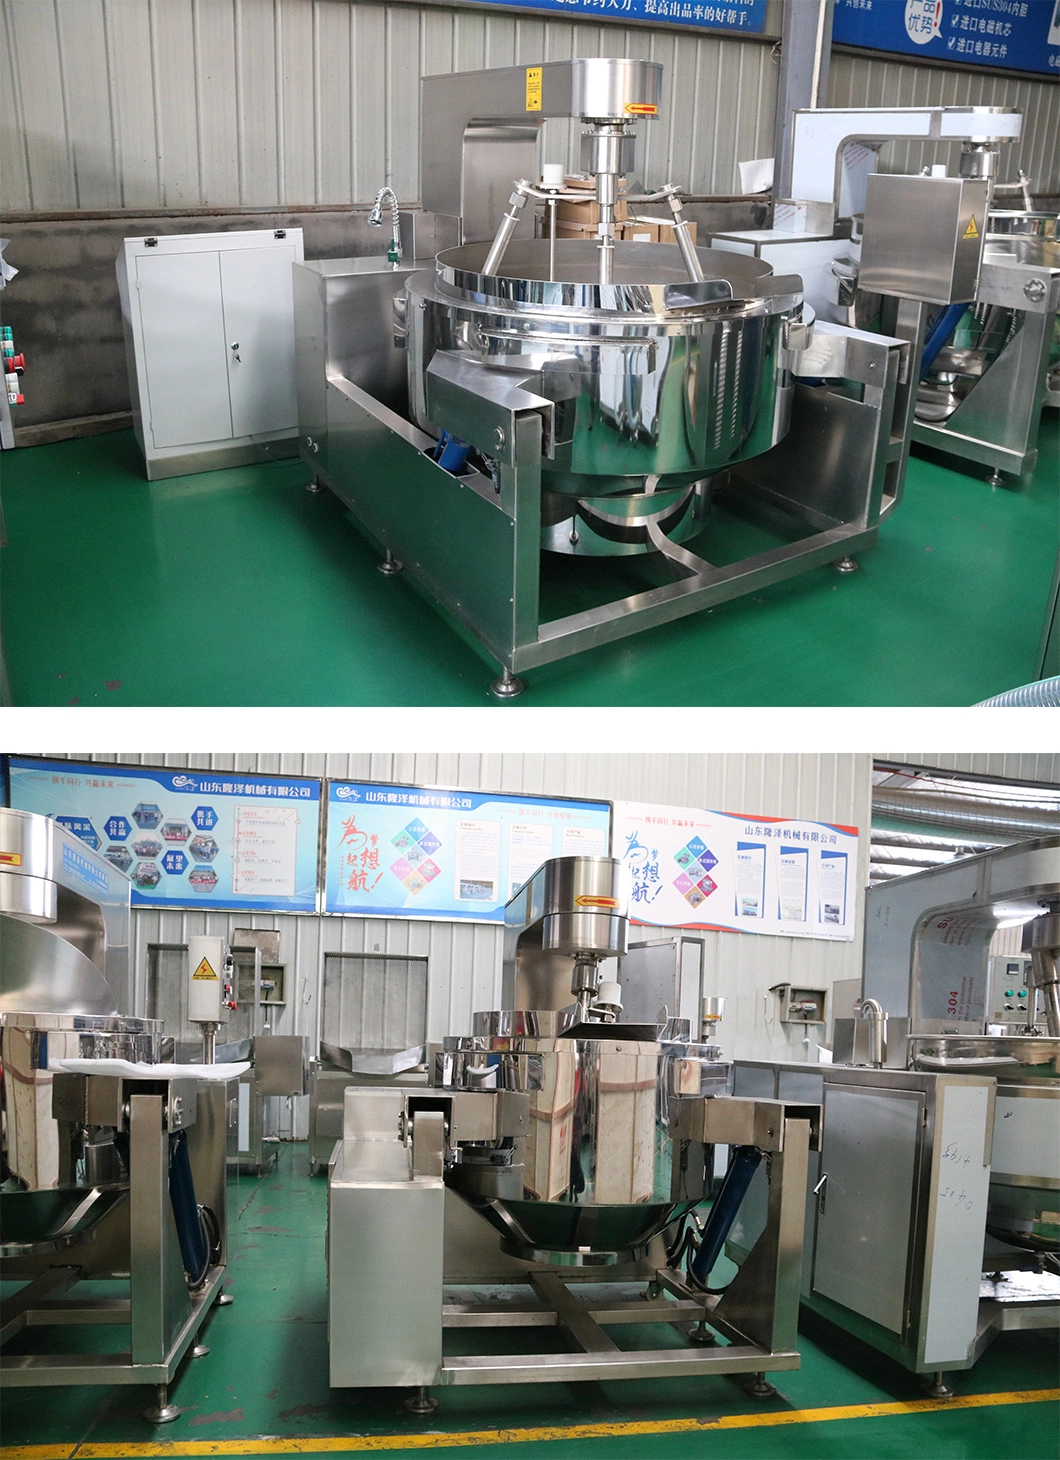 Restaurant Commercial Automatic Multi Function Planetary Tilting Curry Chili Bean Paste Mixing Making Electric Gas Steam Tomato Paste Cooking Wok